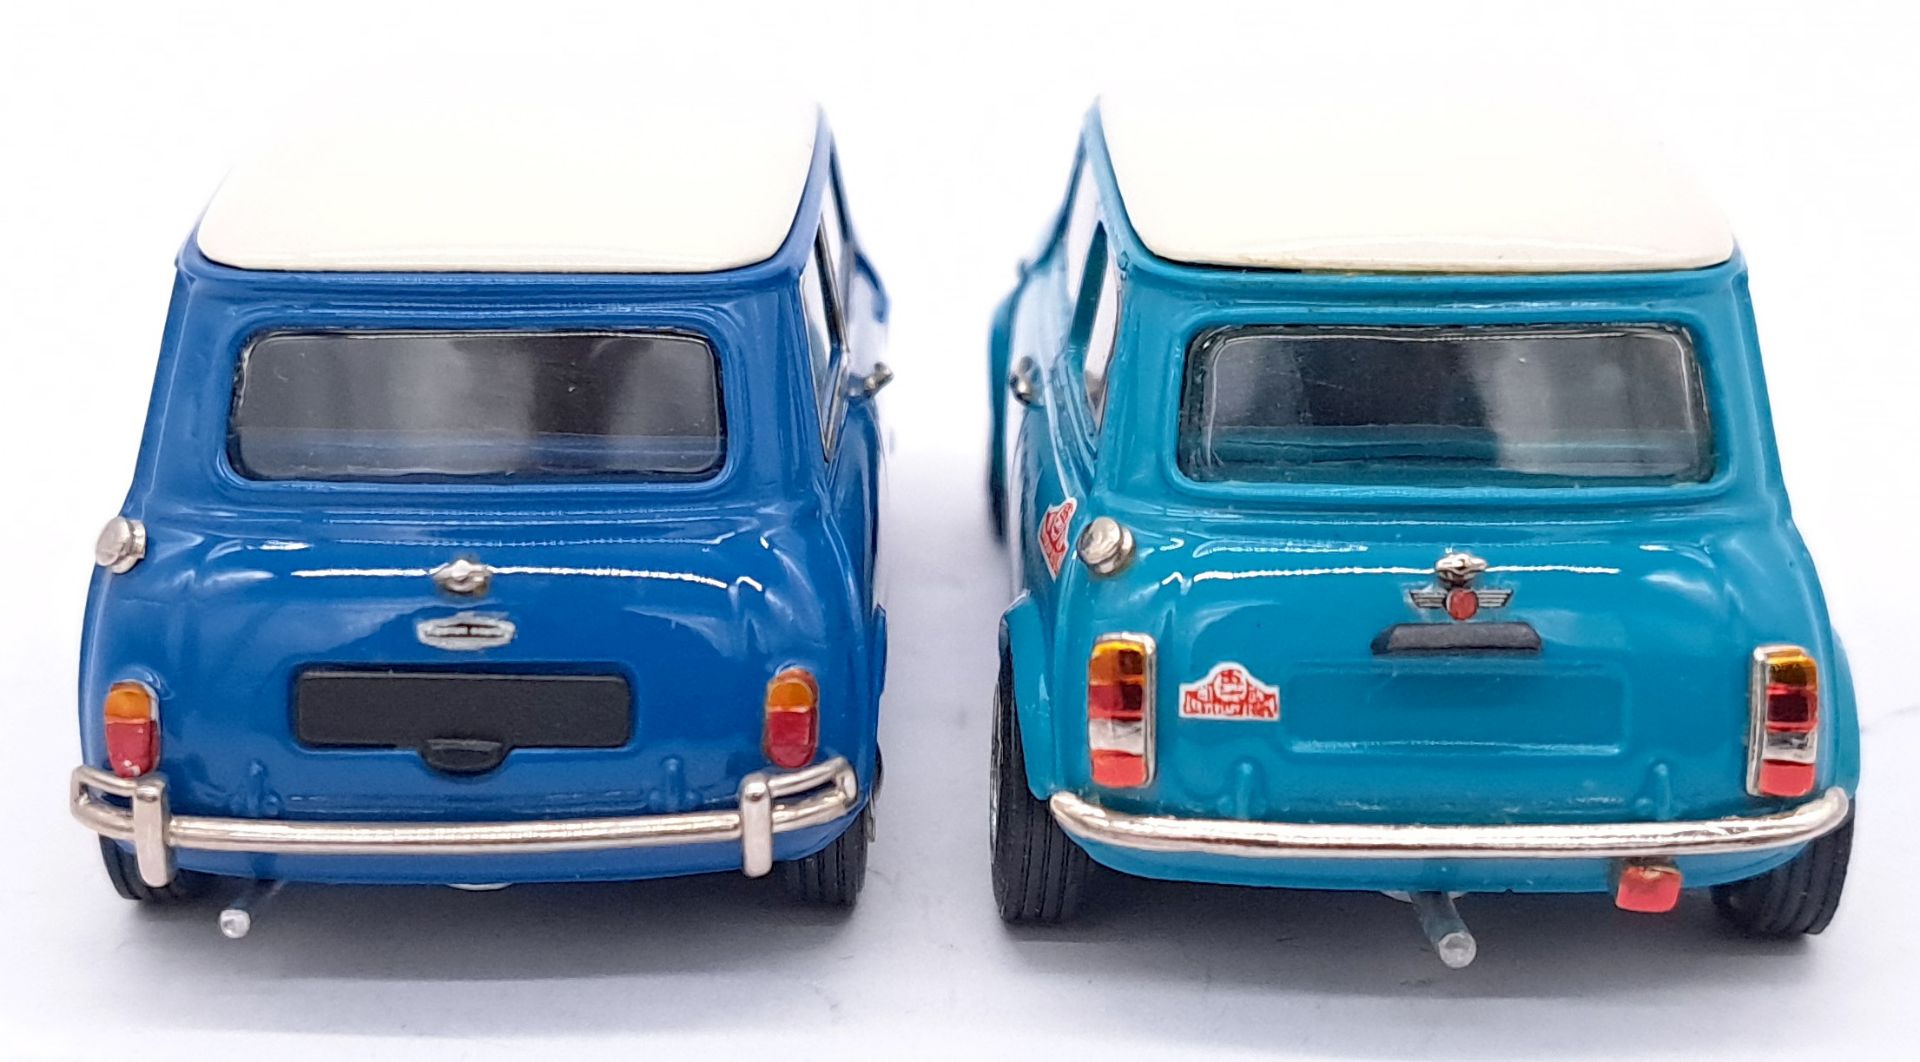 SMTS Voiturette V3 Mini Cooper Road Race Rally boxed pair - Image 6 of 8